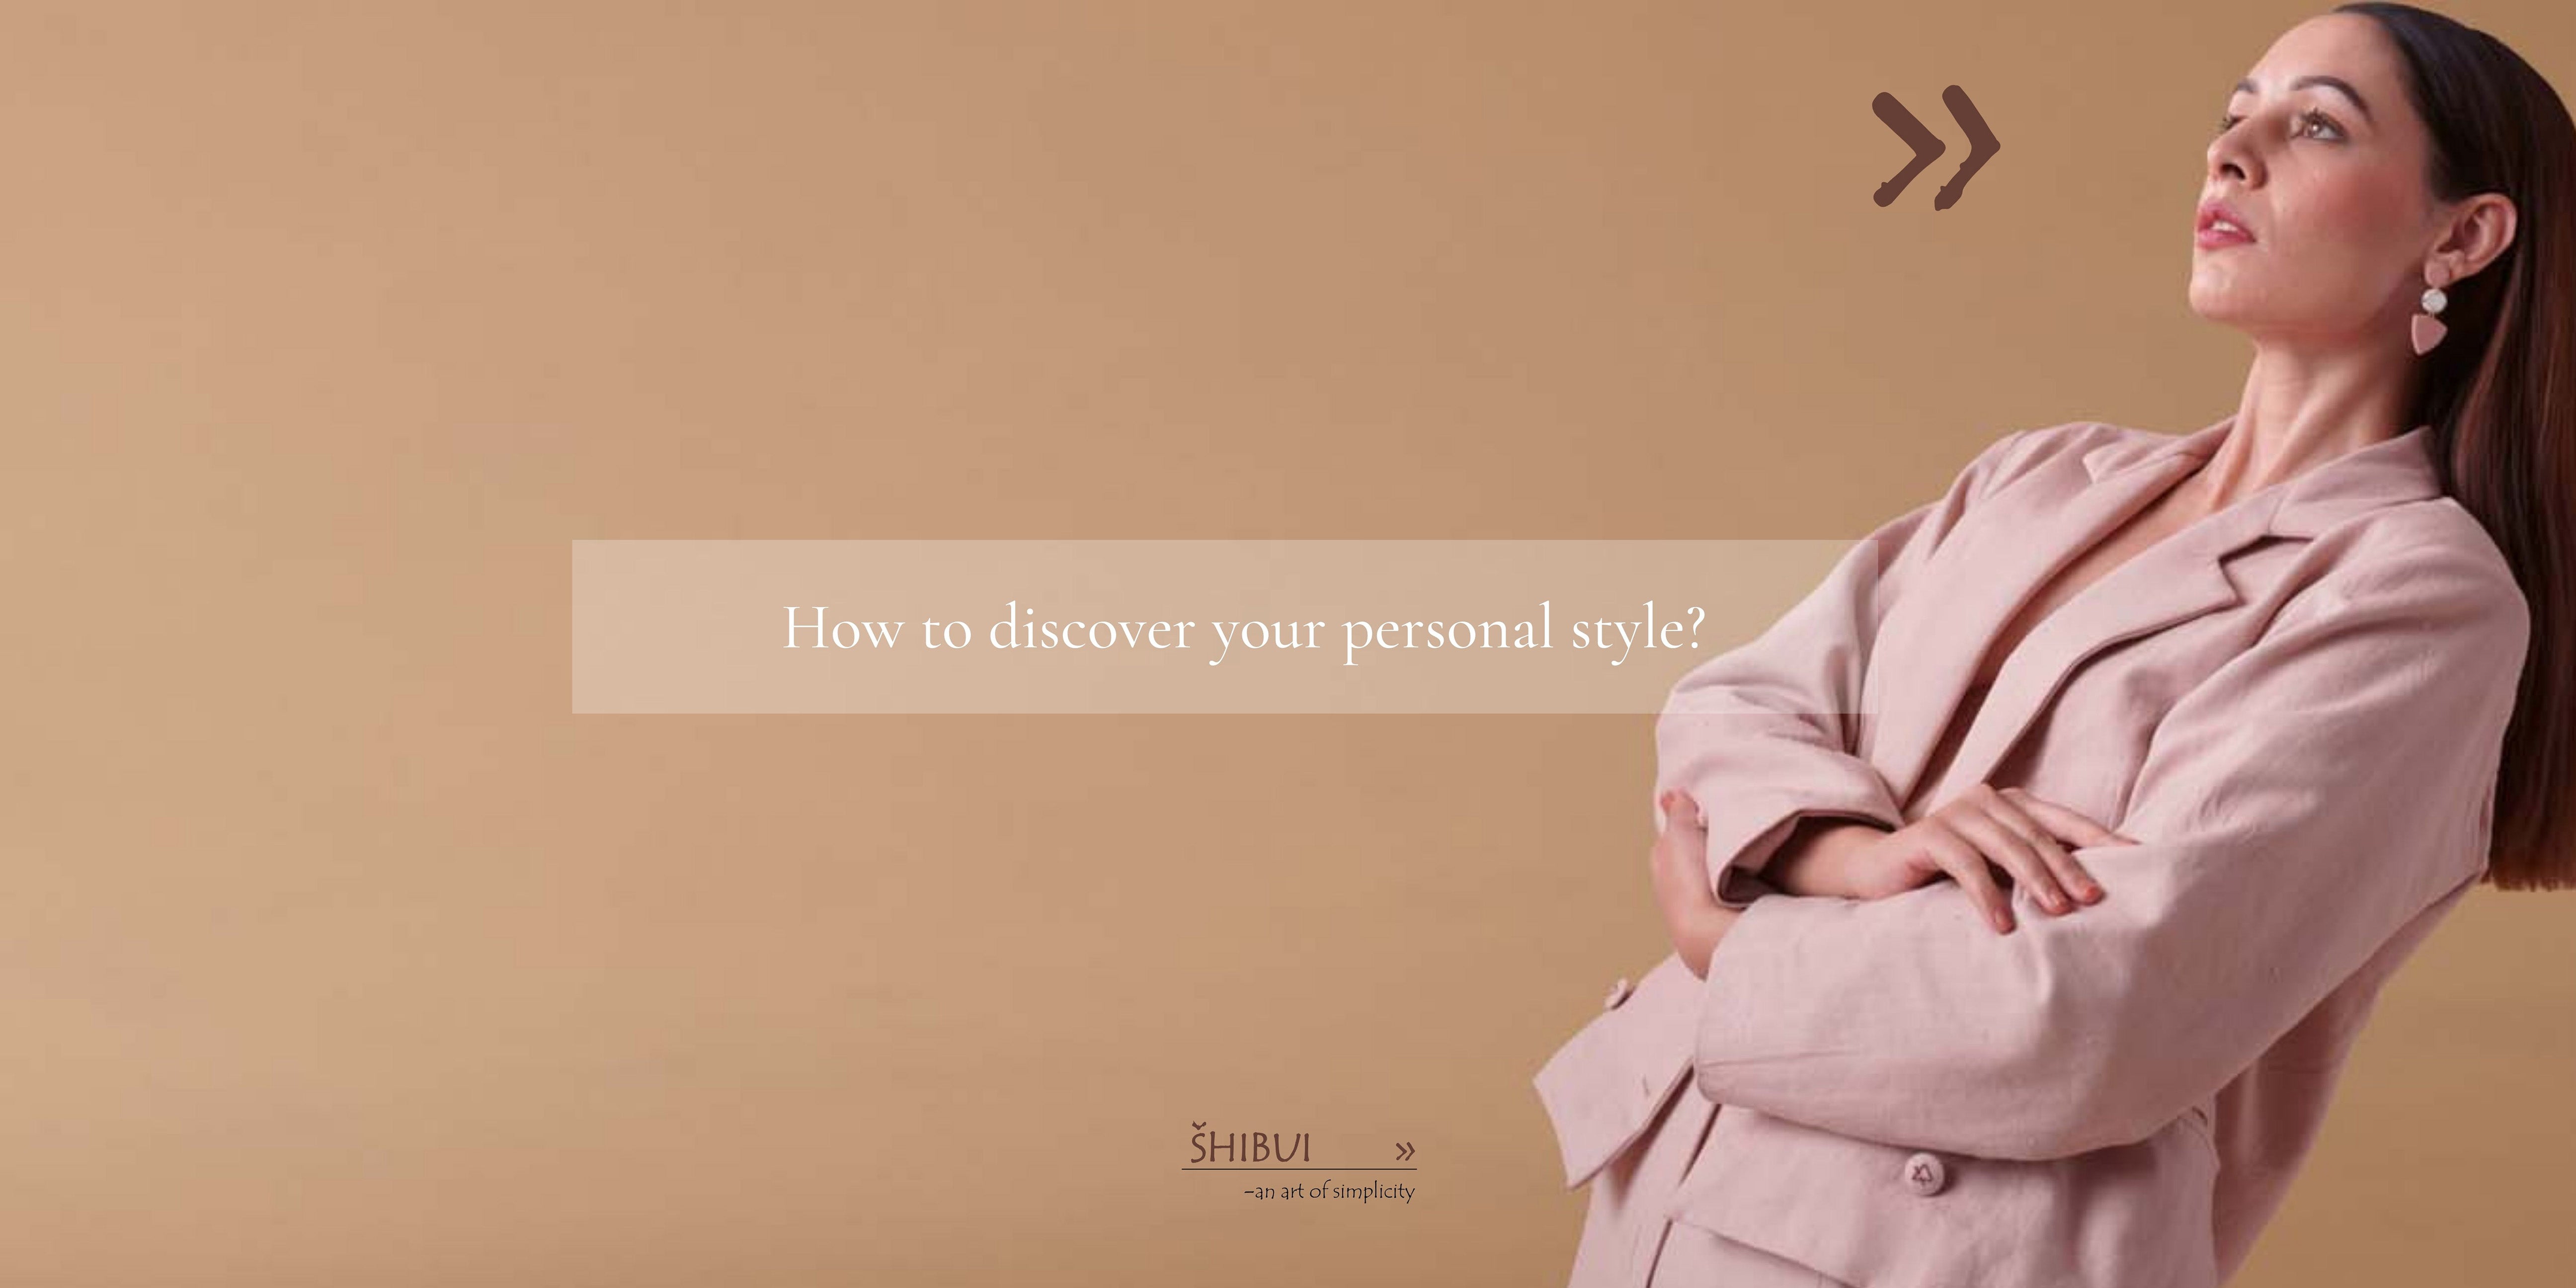 HOW TO DISCOVER YOUR PERSONAL STYLE?